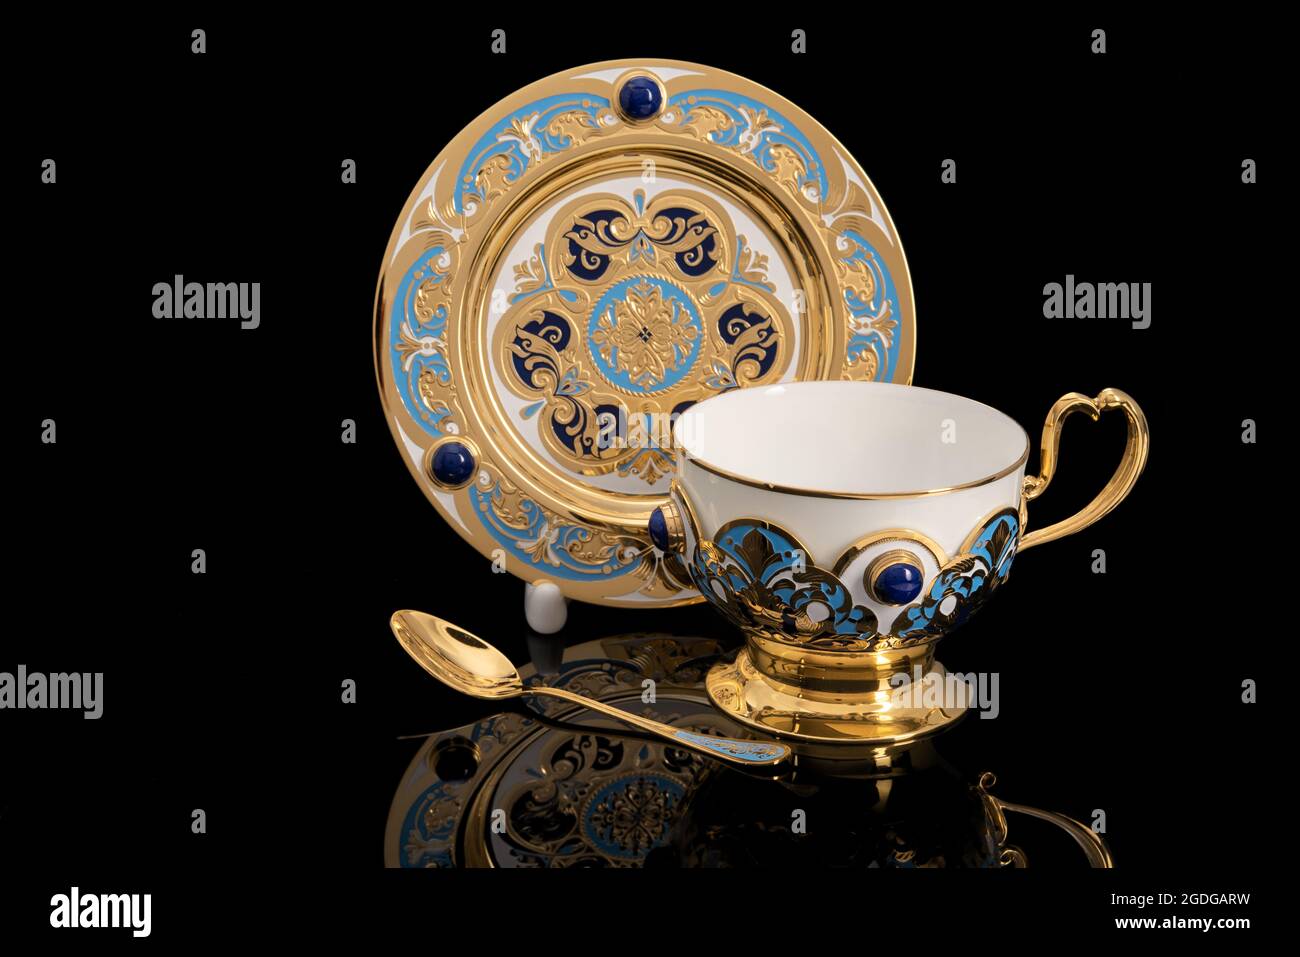 Luxury gold Tea party kit. Cup, plate, and spoon. isolated on black background with reflection. Souvenir gift with traditional patterns. Stock Photo